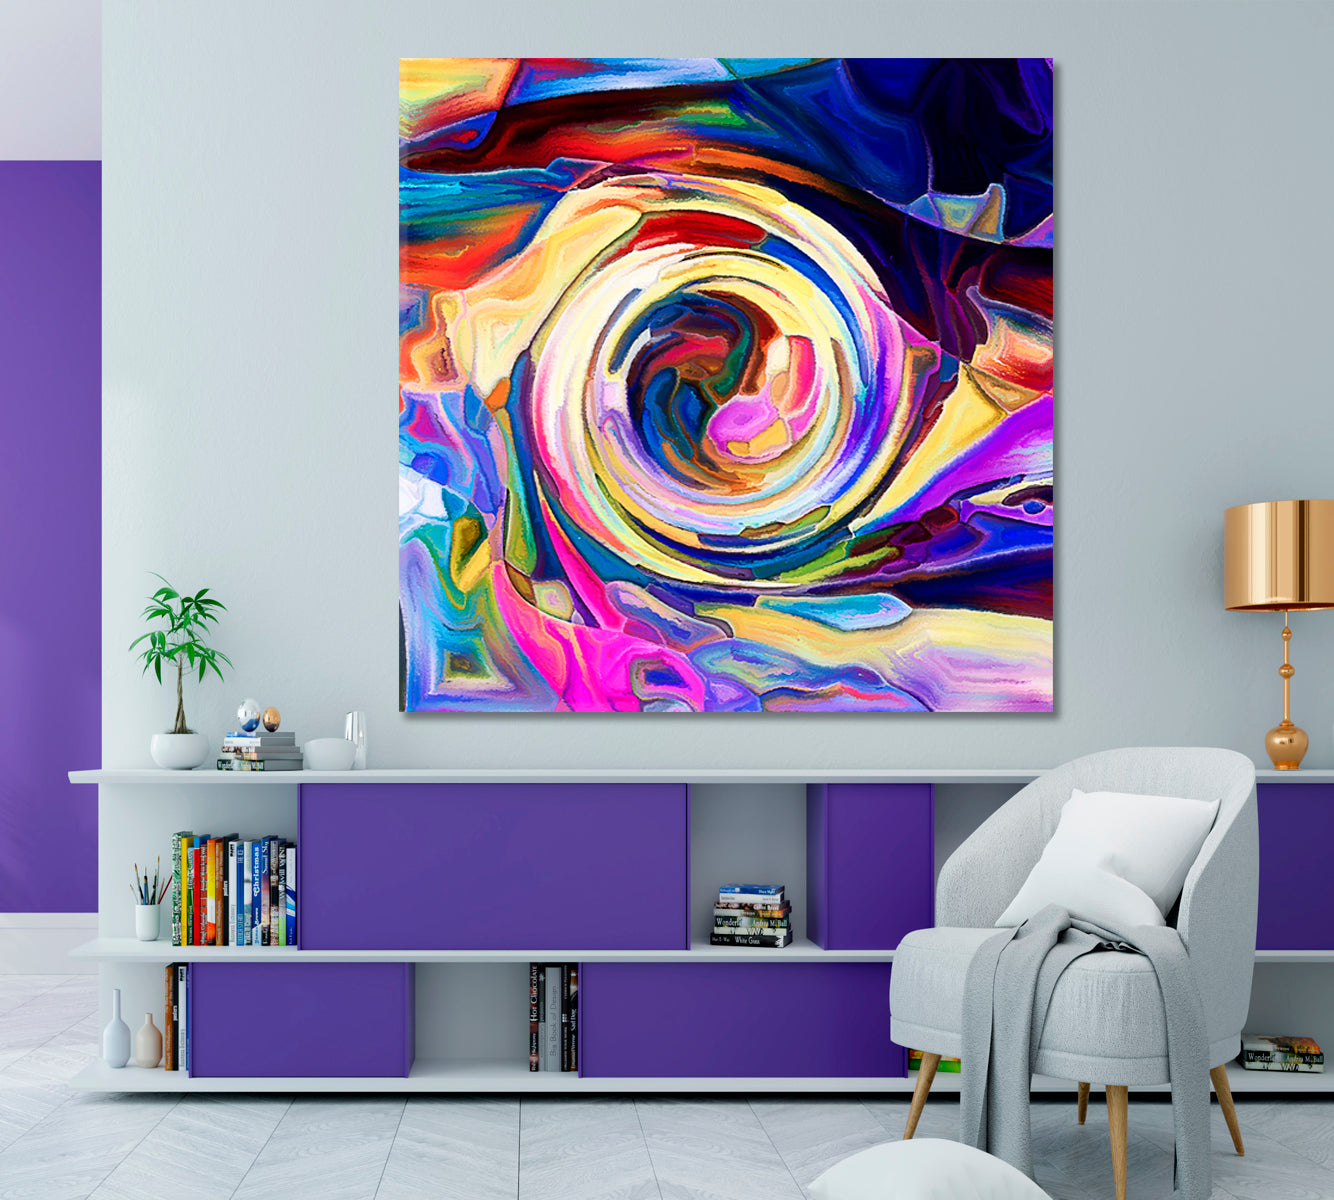 SWIRL Colors And Shapes - Square Panel Contemporary Art Artesty   